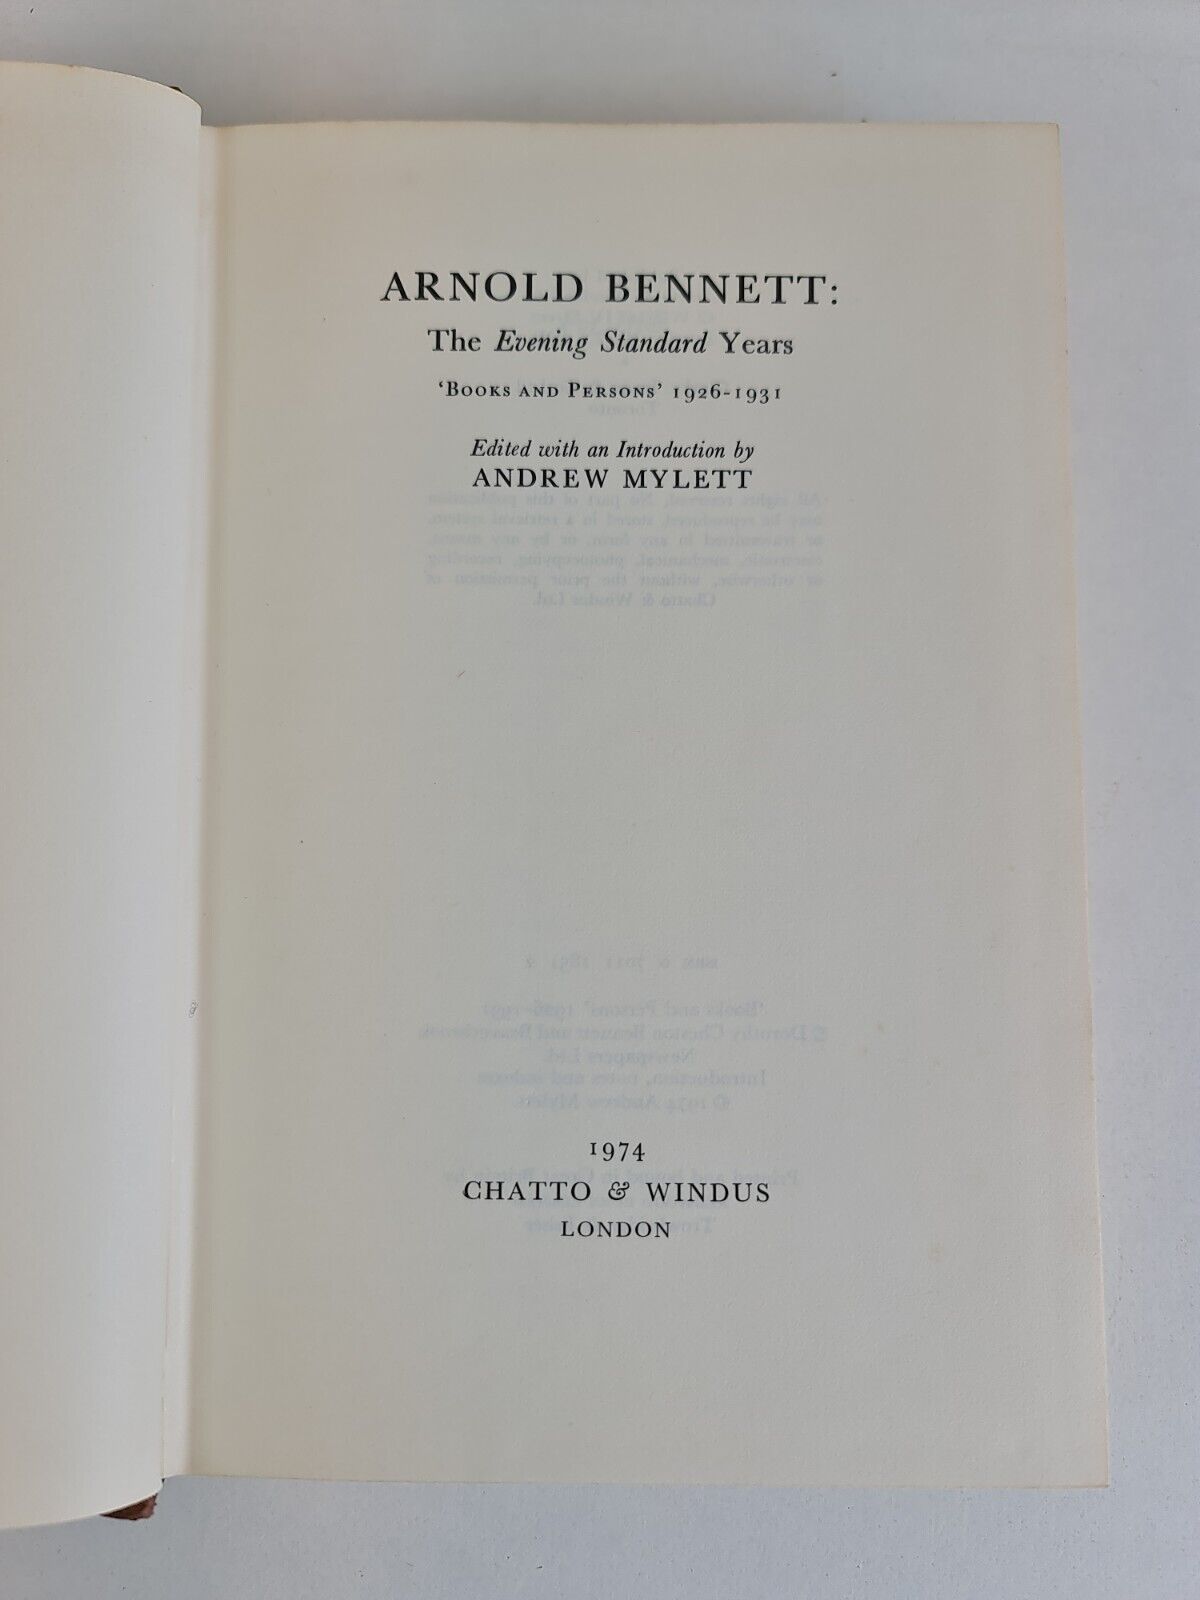 Evening Standard Years: Books & Persons 1926-1931 by Arnold Bennett (1974)